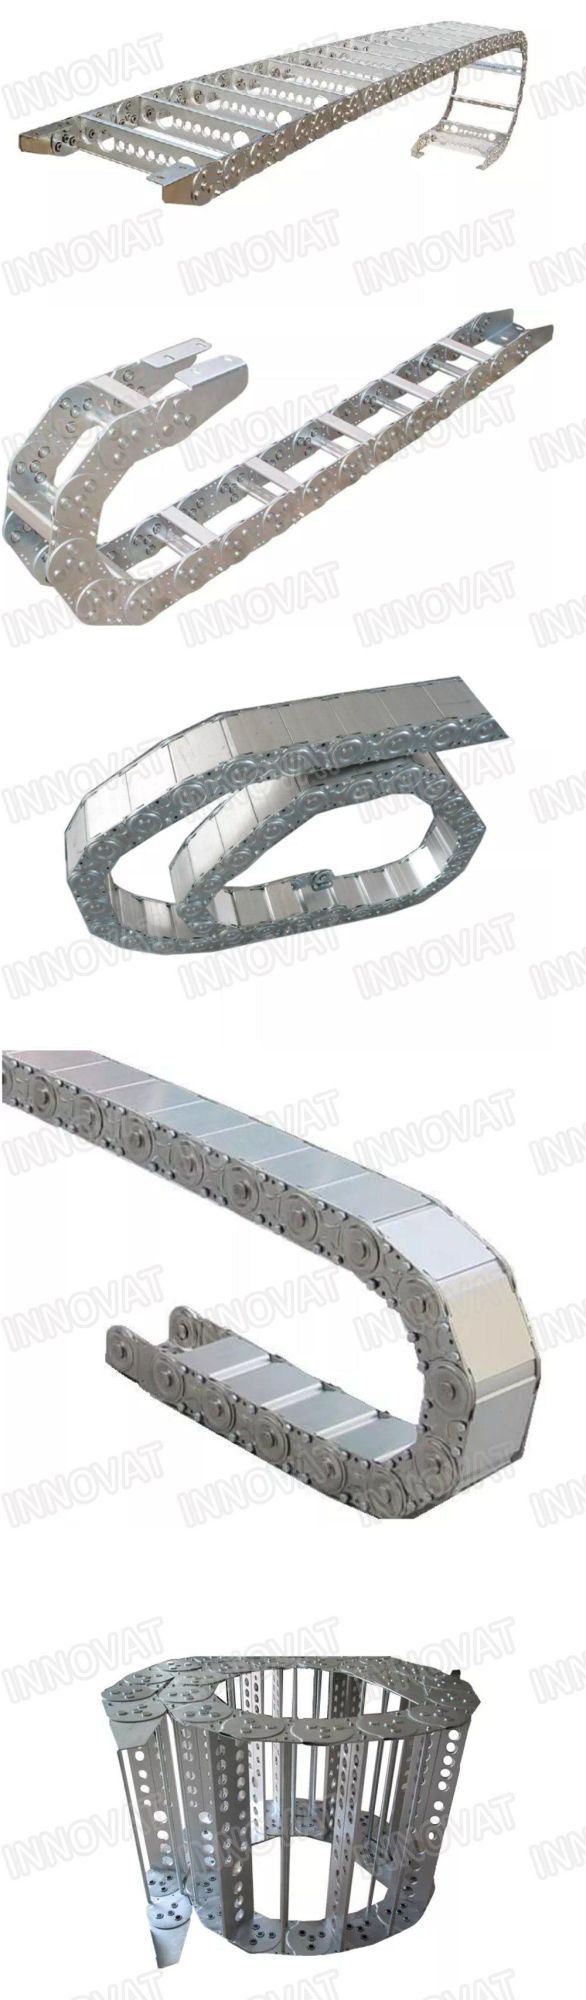 Various Good Quality Chain Drag Enclosed Steel Cable Drag Chain